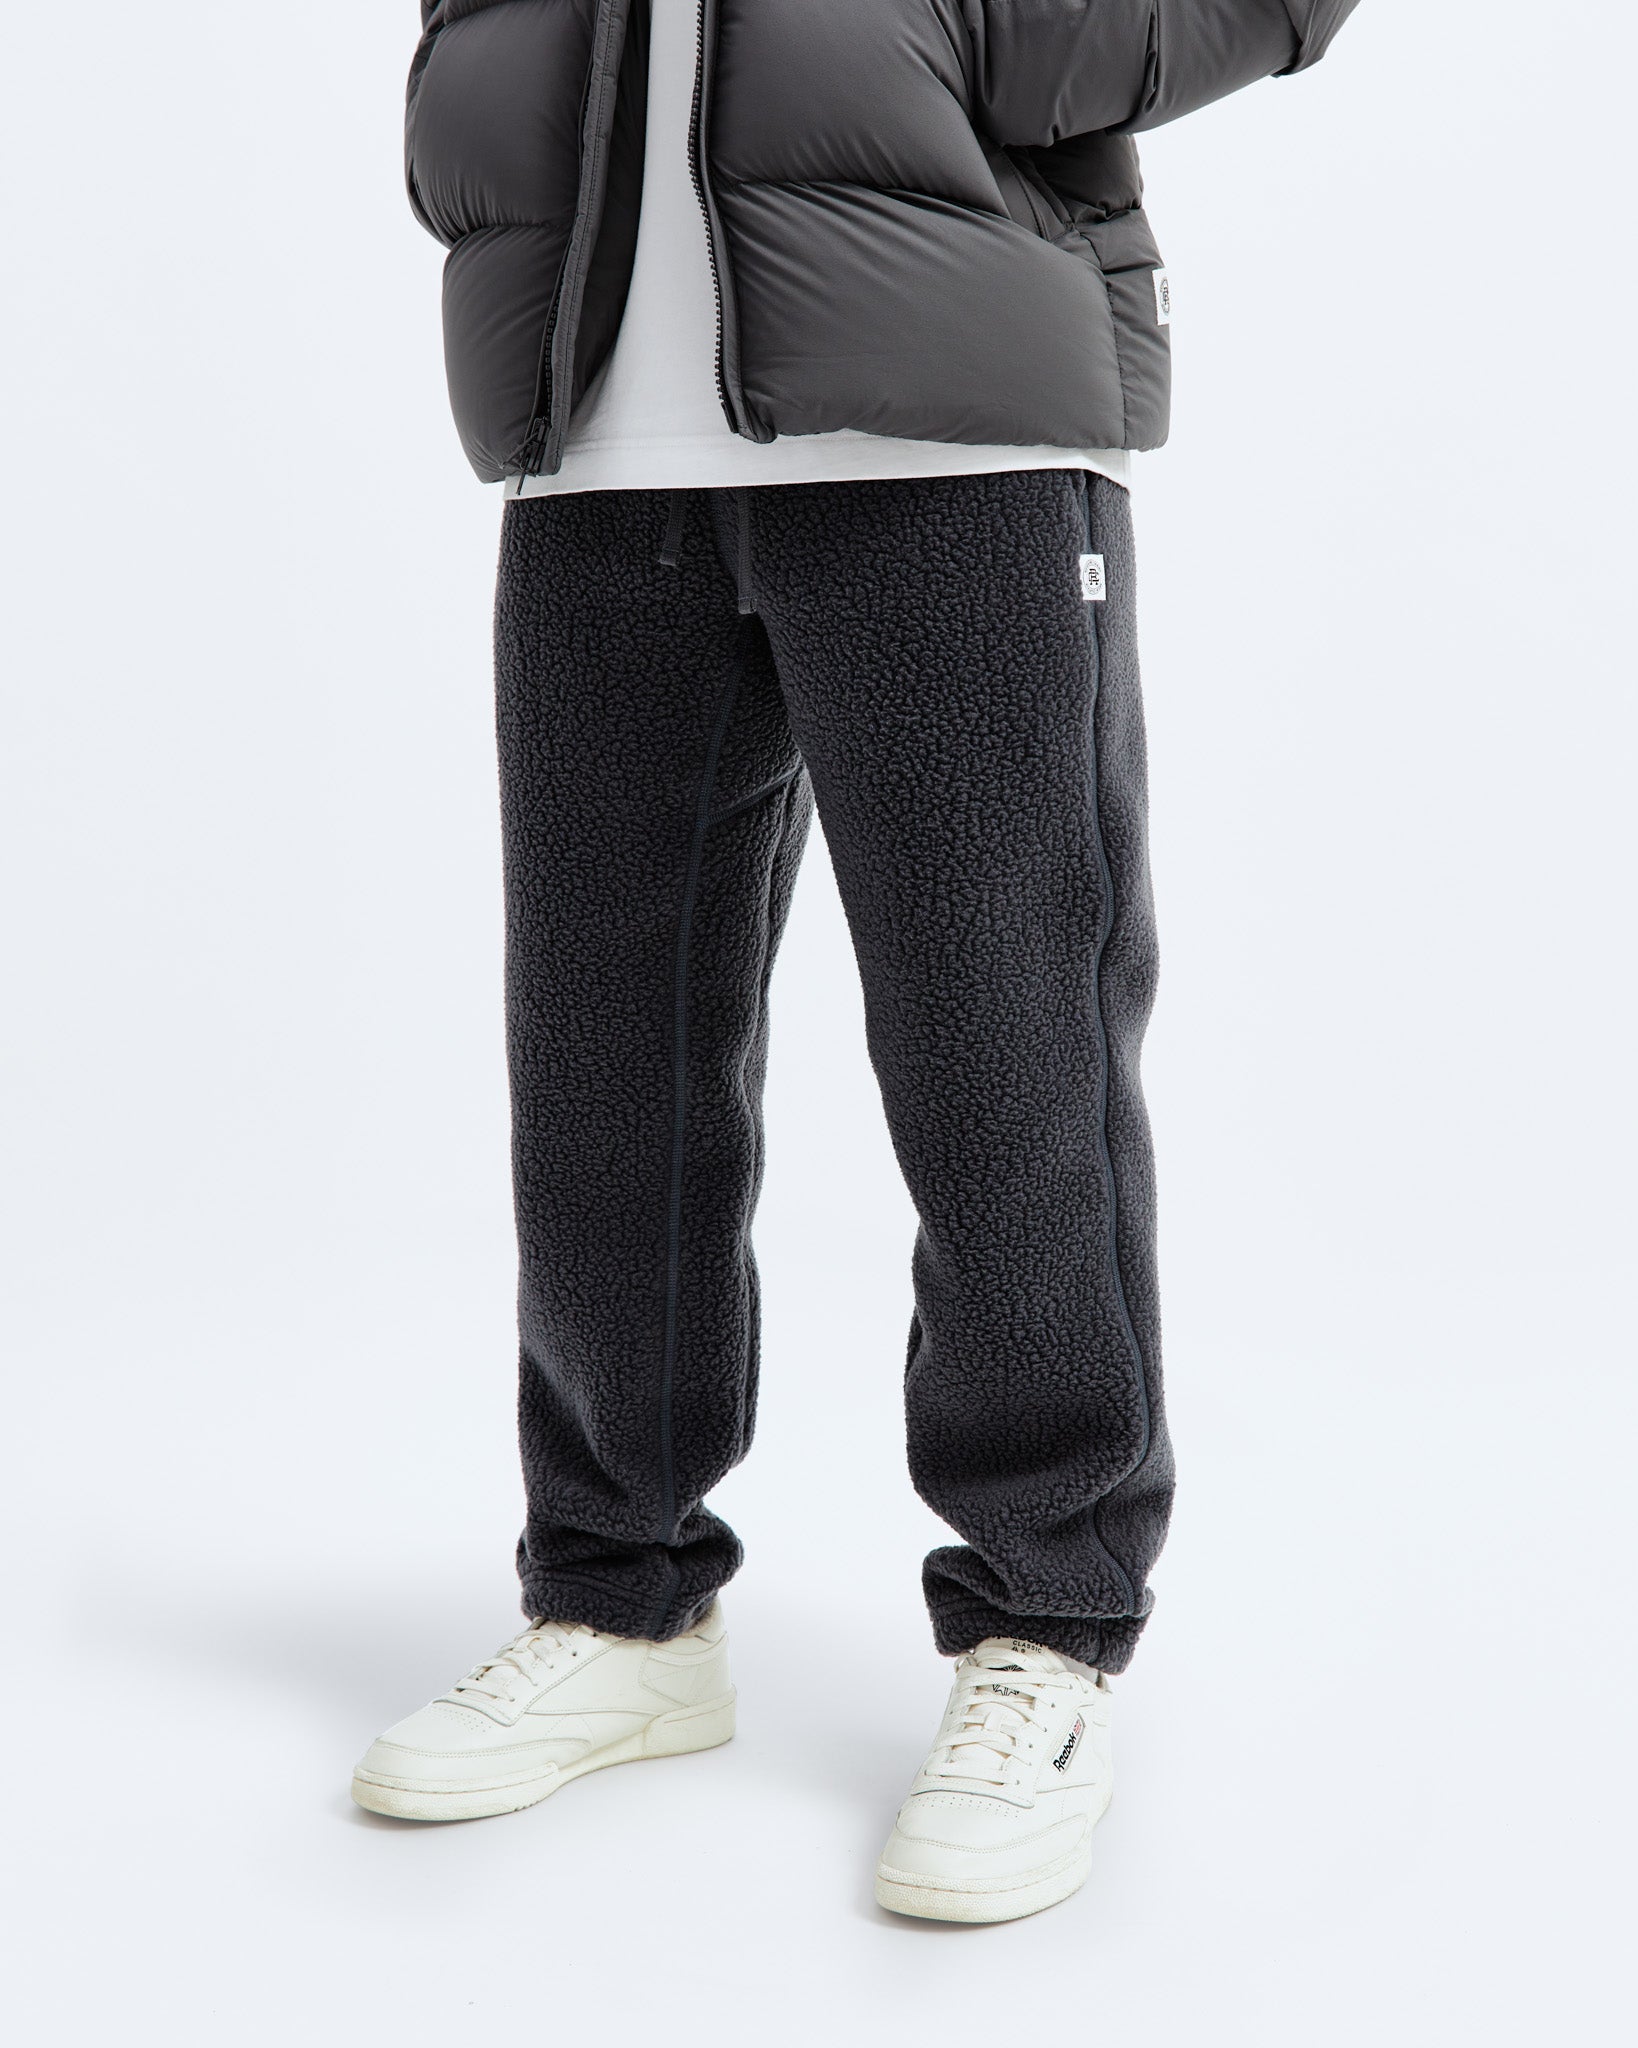 Polartec Thermal Pro® Jogger | Reigning Champ